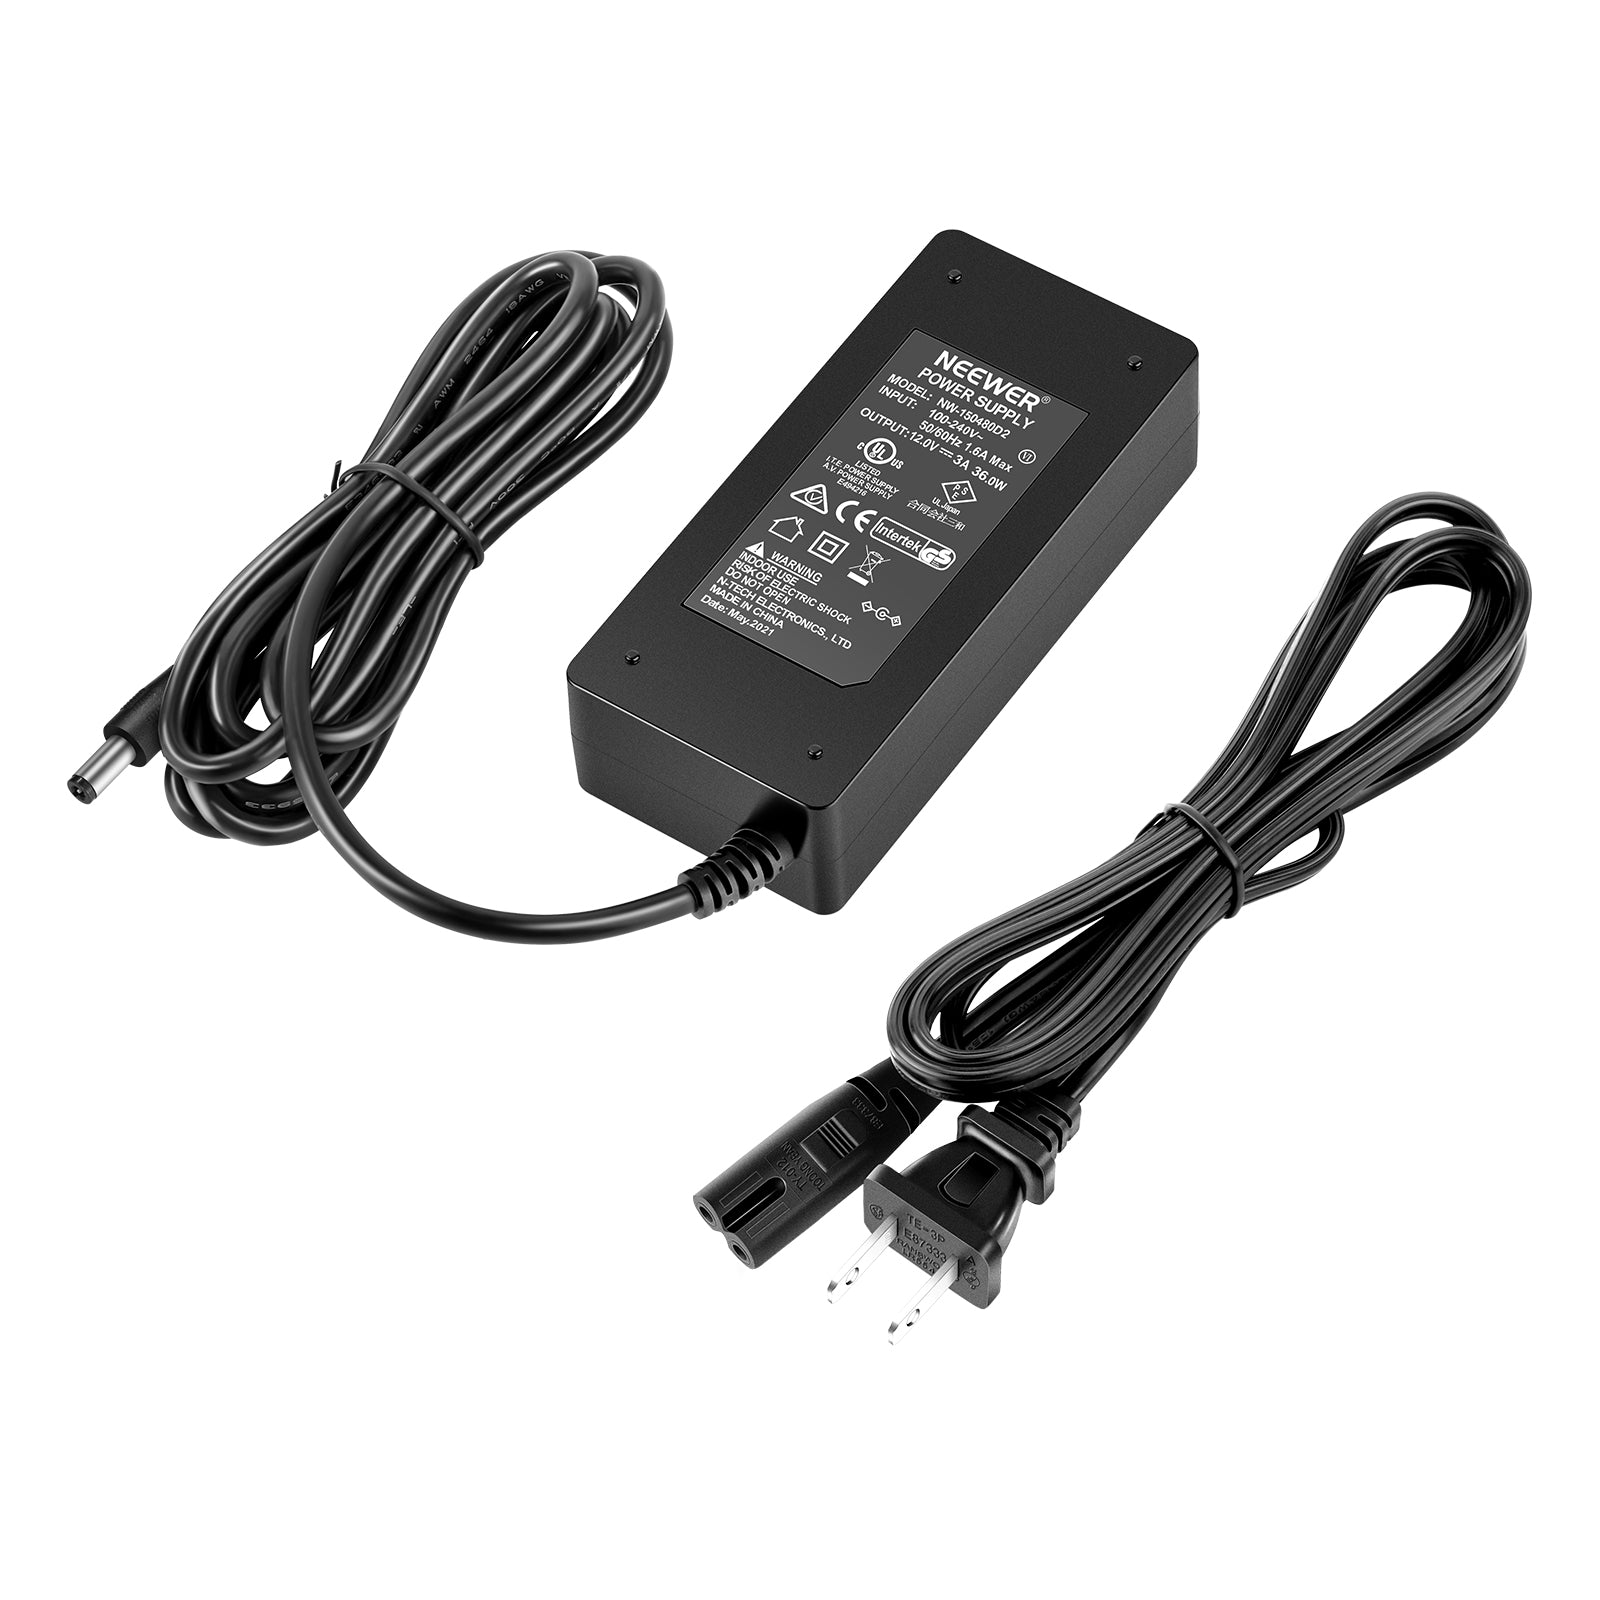 DC Power Adapter - 12V, 5A